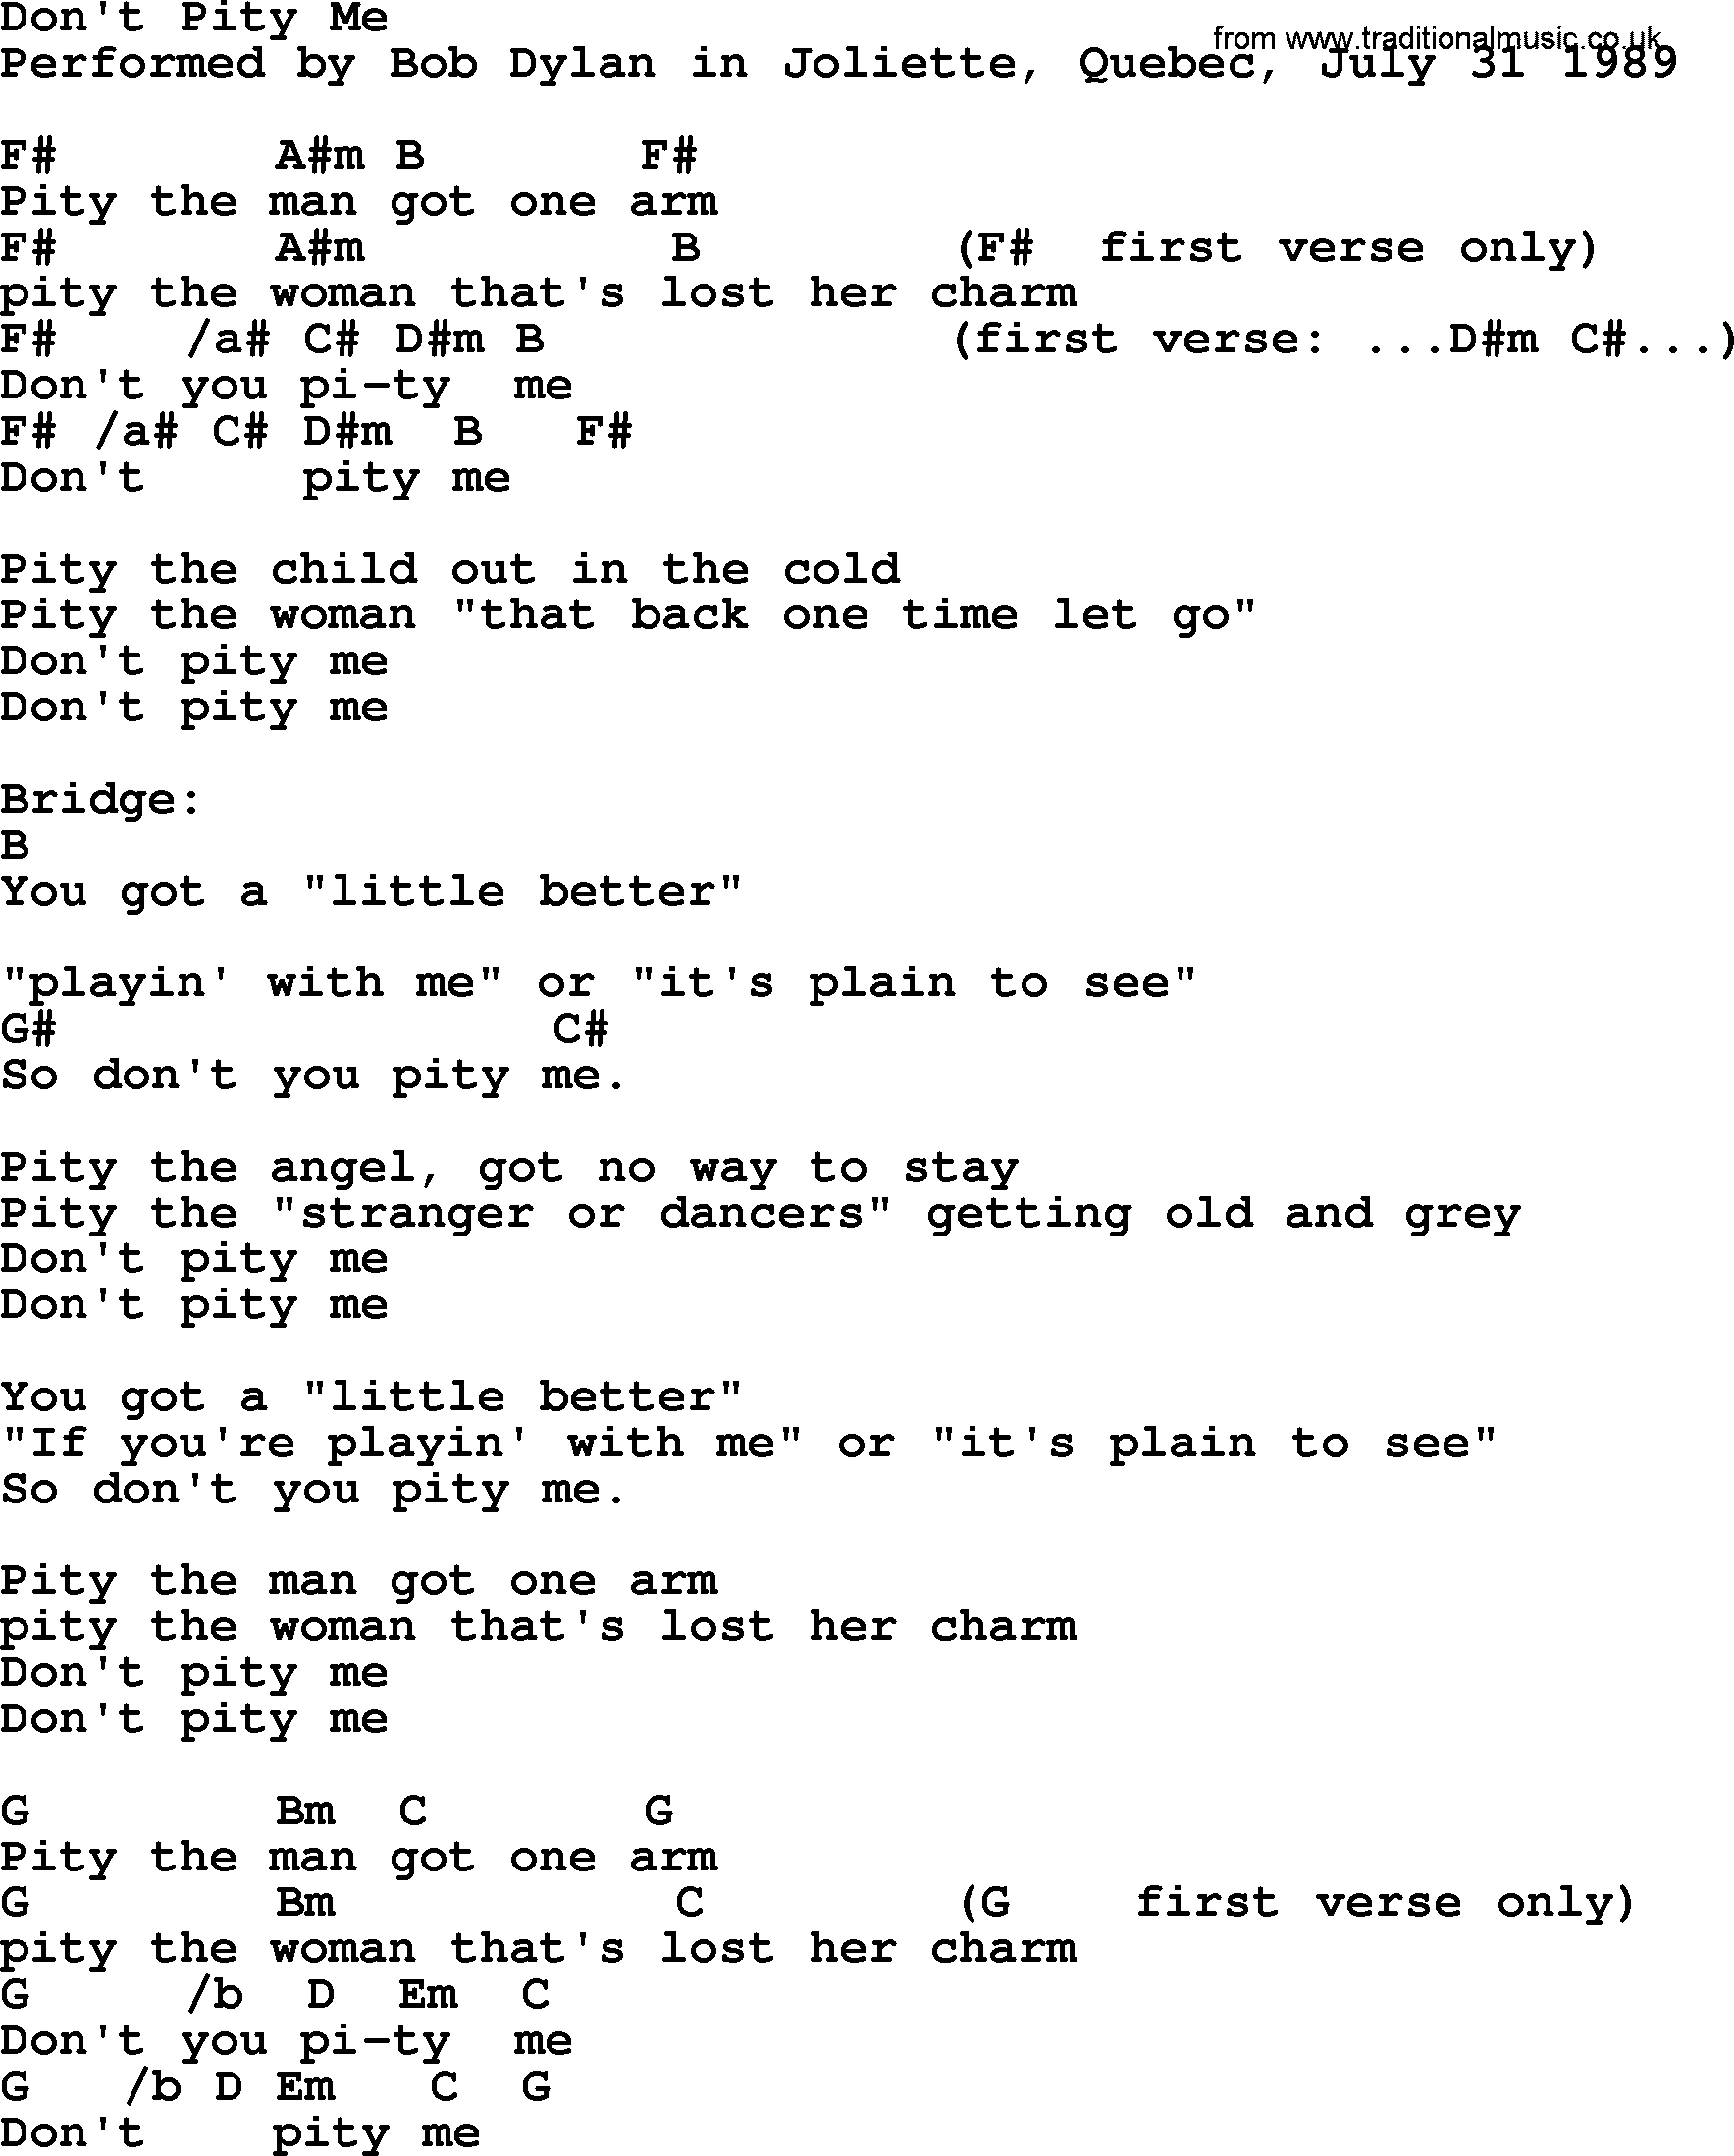 Bob Dylan song, lyrics with chords - Don't Pity Me